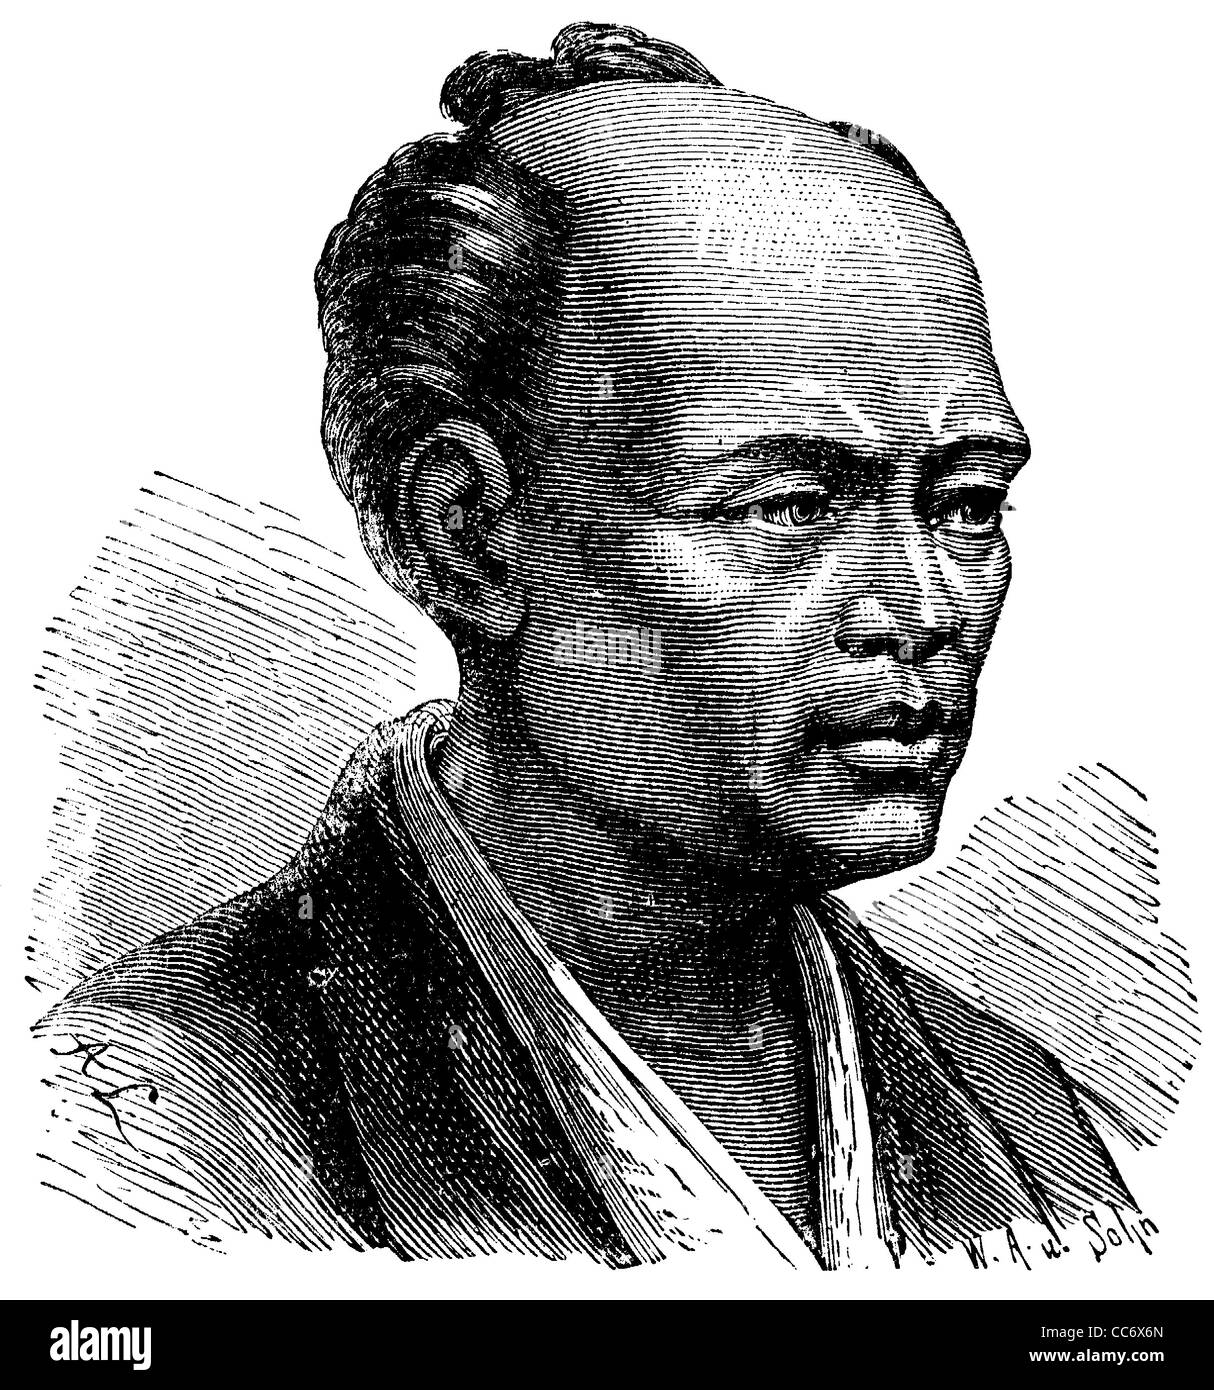 Portrait of a Japanese, man from Japan Stock Photo